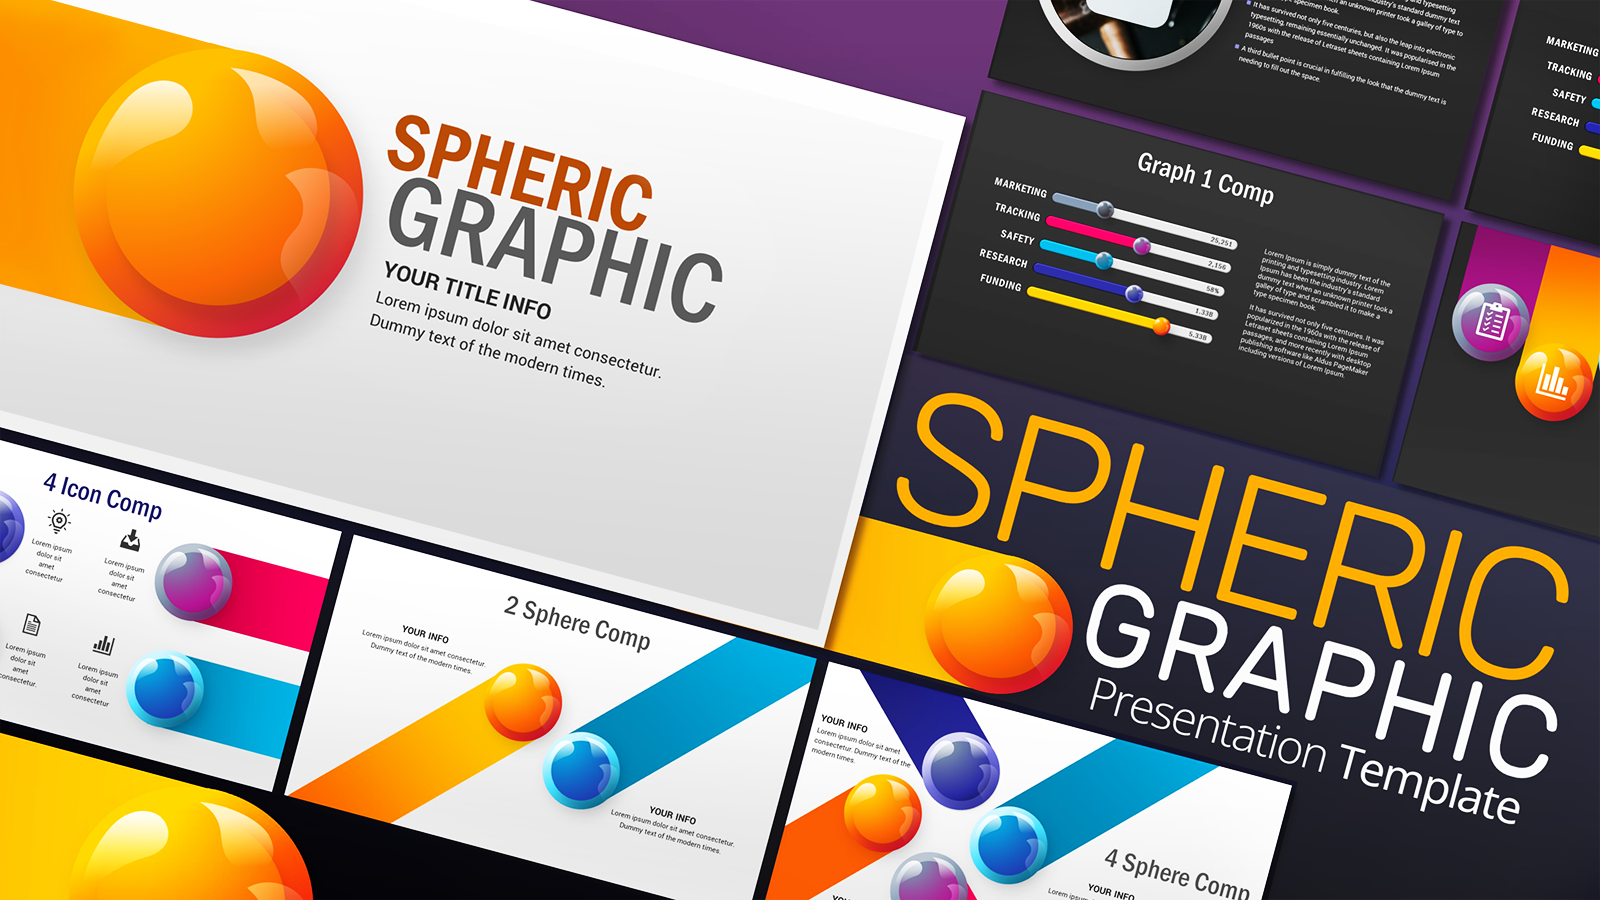 Animated PowerPoint Templates and Presentation Designs from  